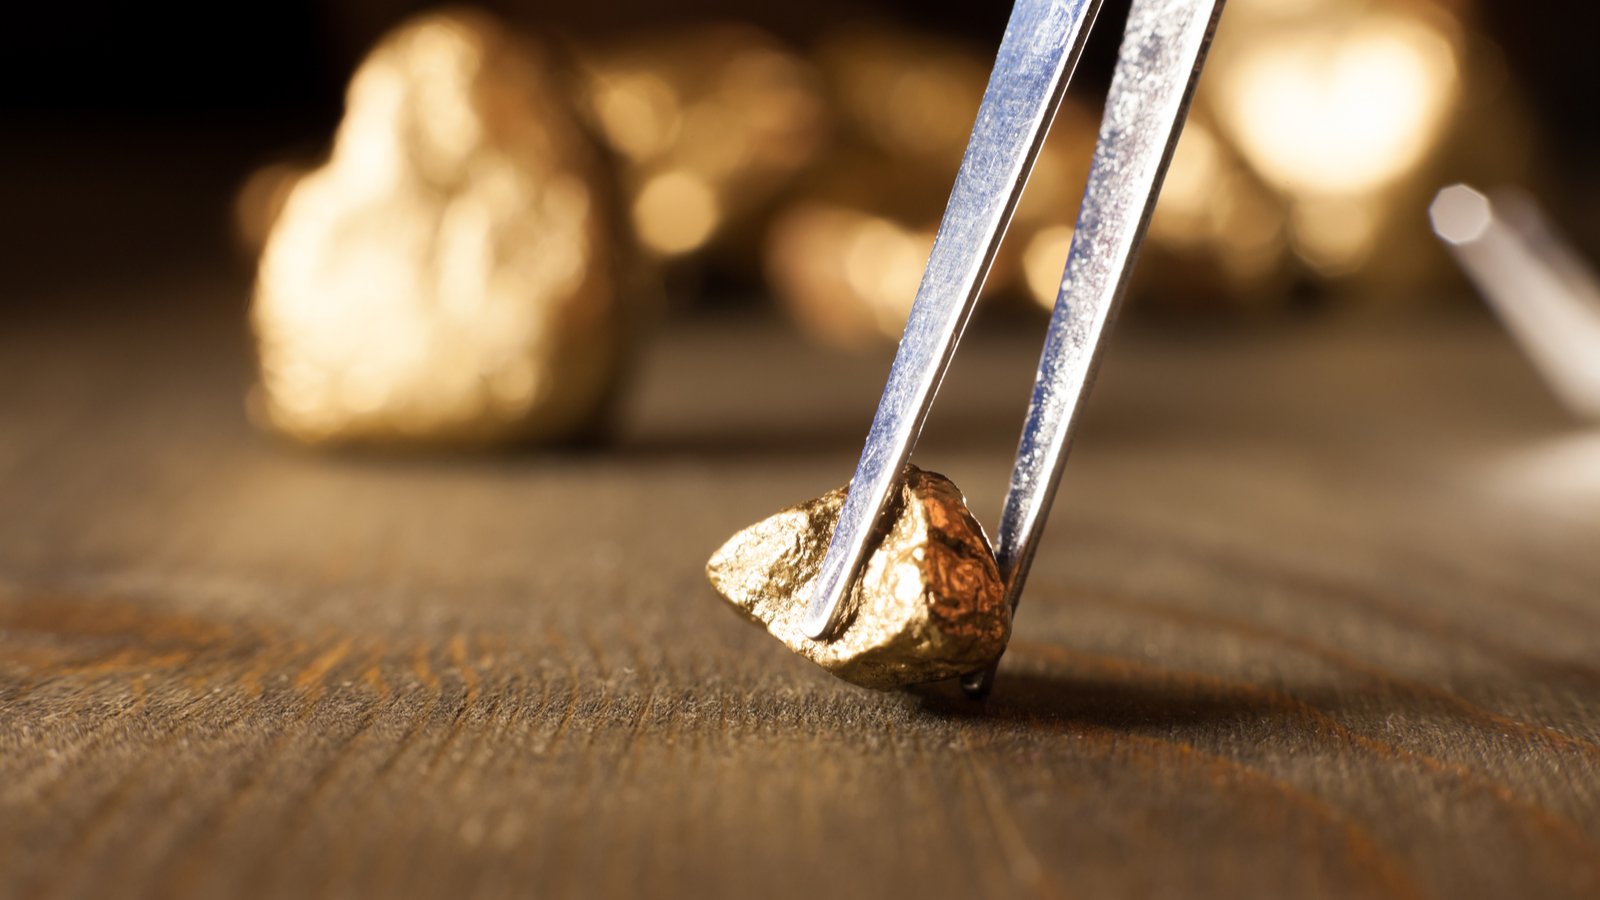 NEM Stock. A photo of a gold nugget on a table, being picked up by tweezers, with more gold behind it.